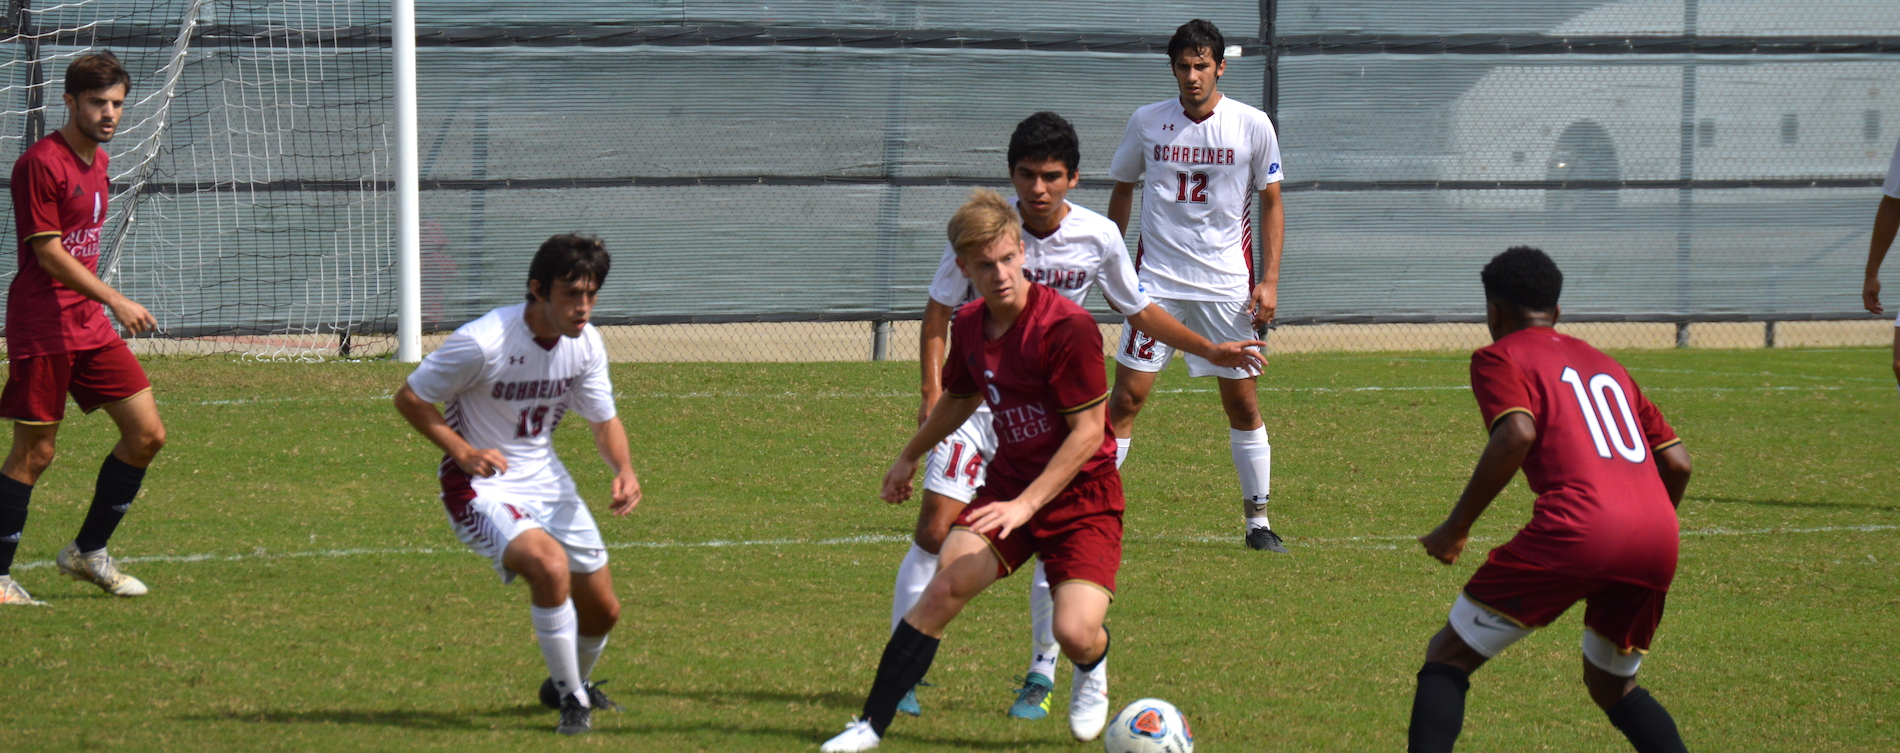 'Roos Hold Off TLU for 1-0 Victory